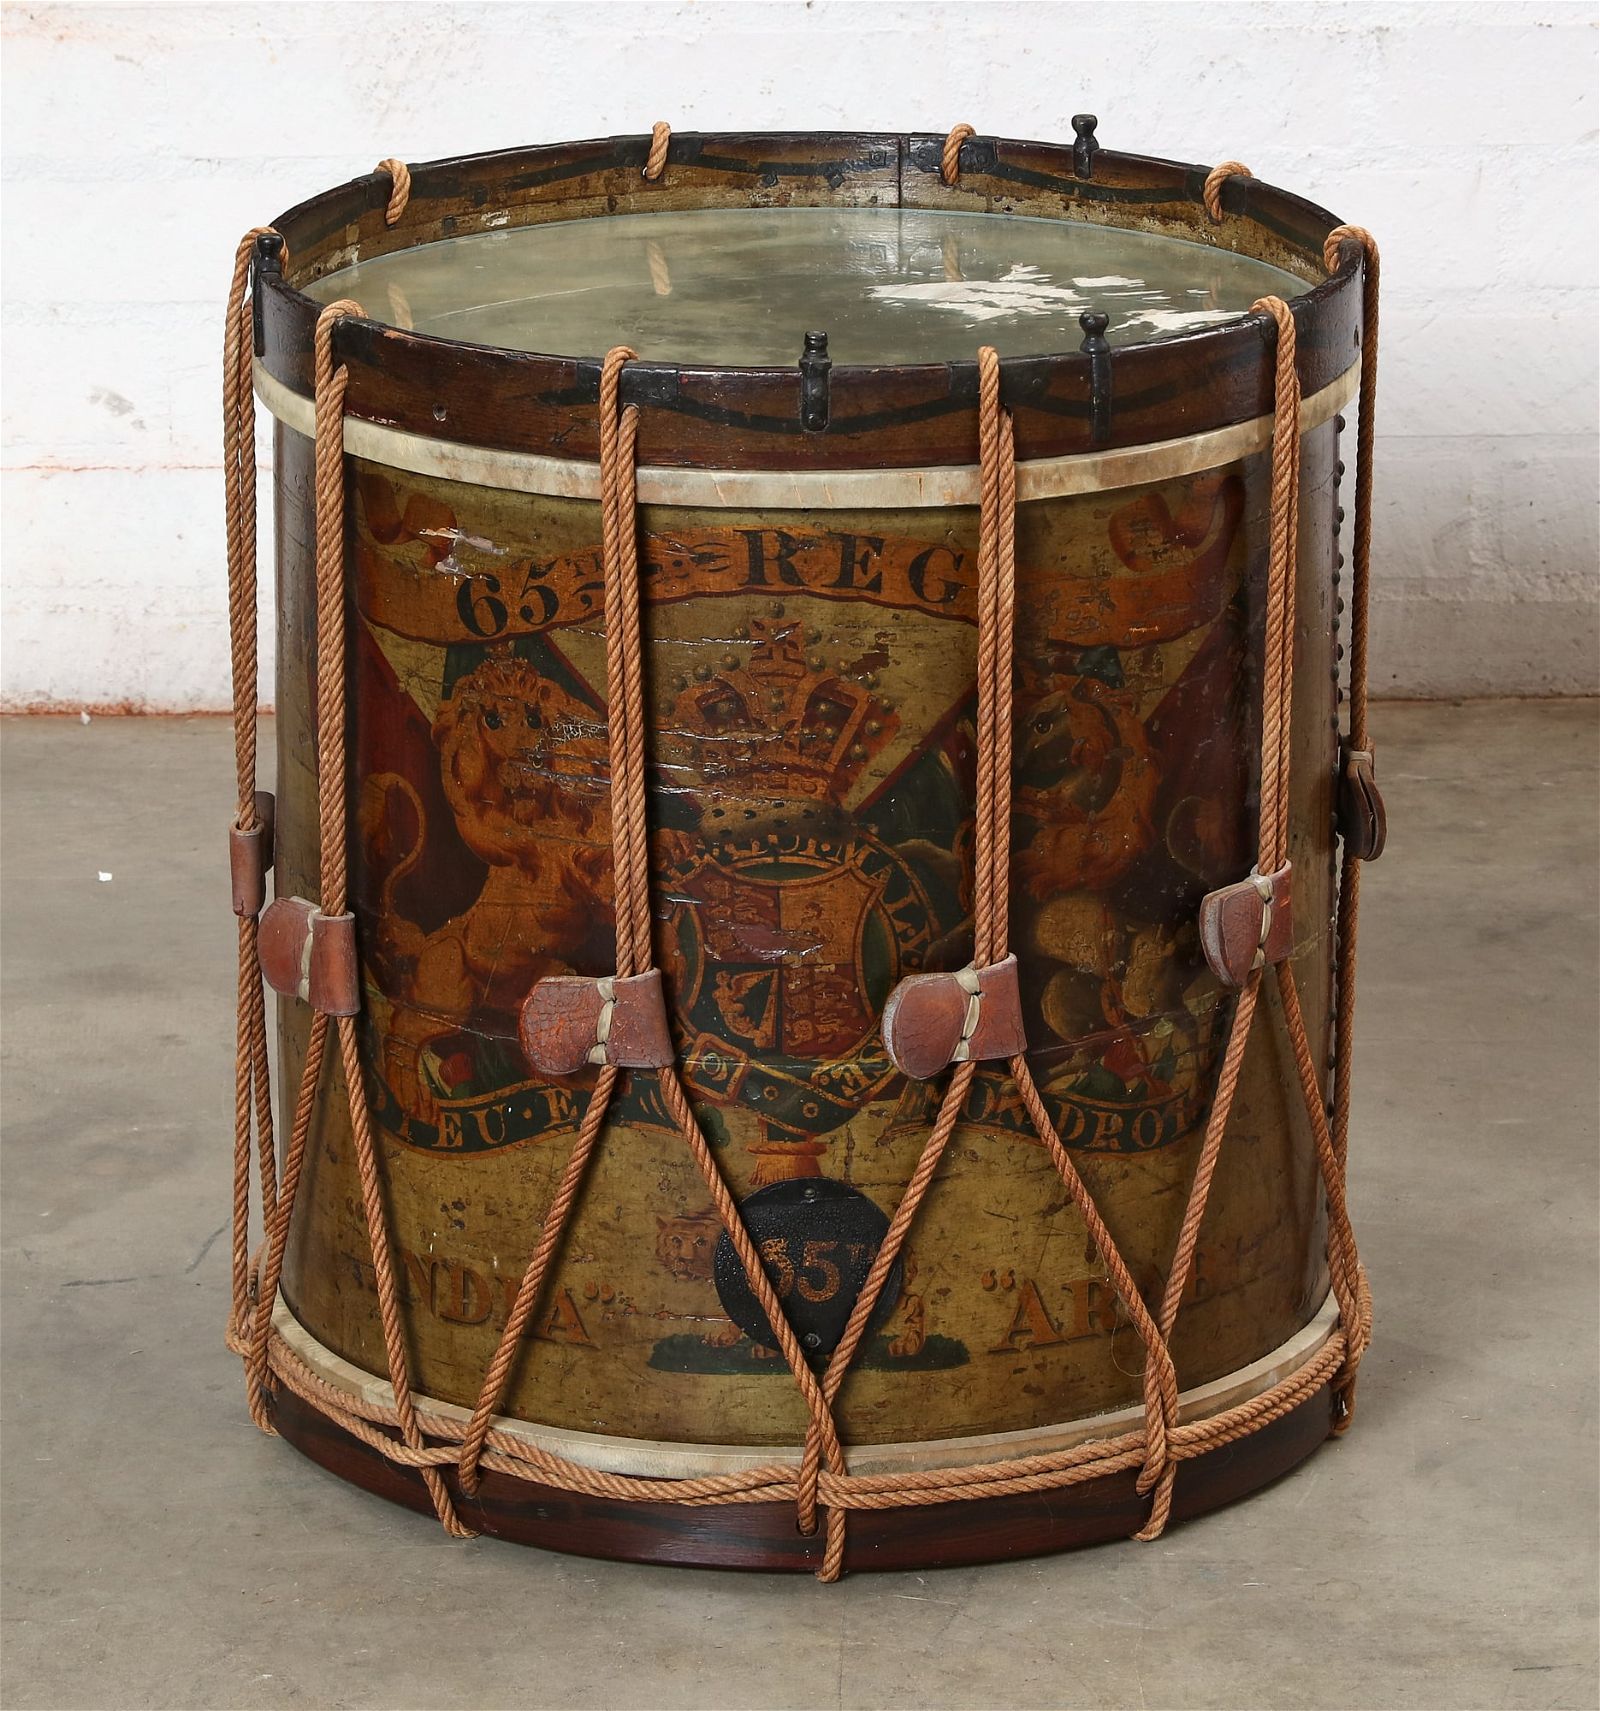 A BRITISH MILITARY DRUM NOW AS